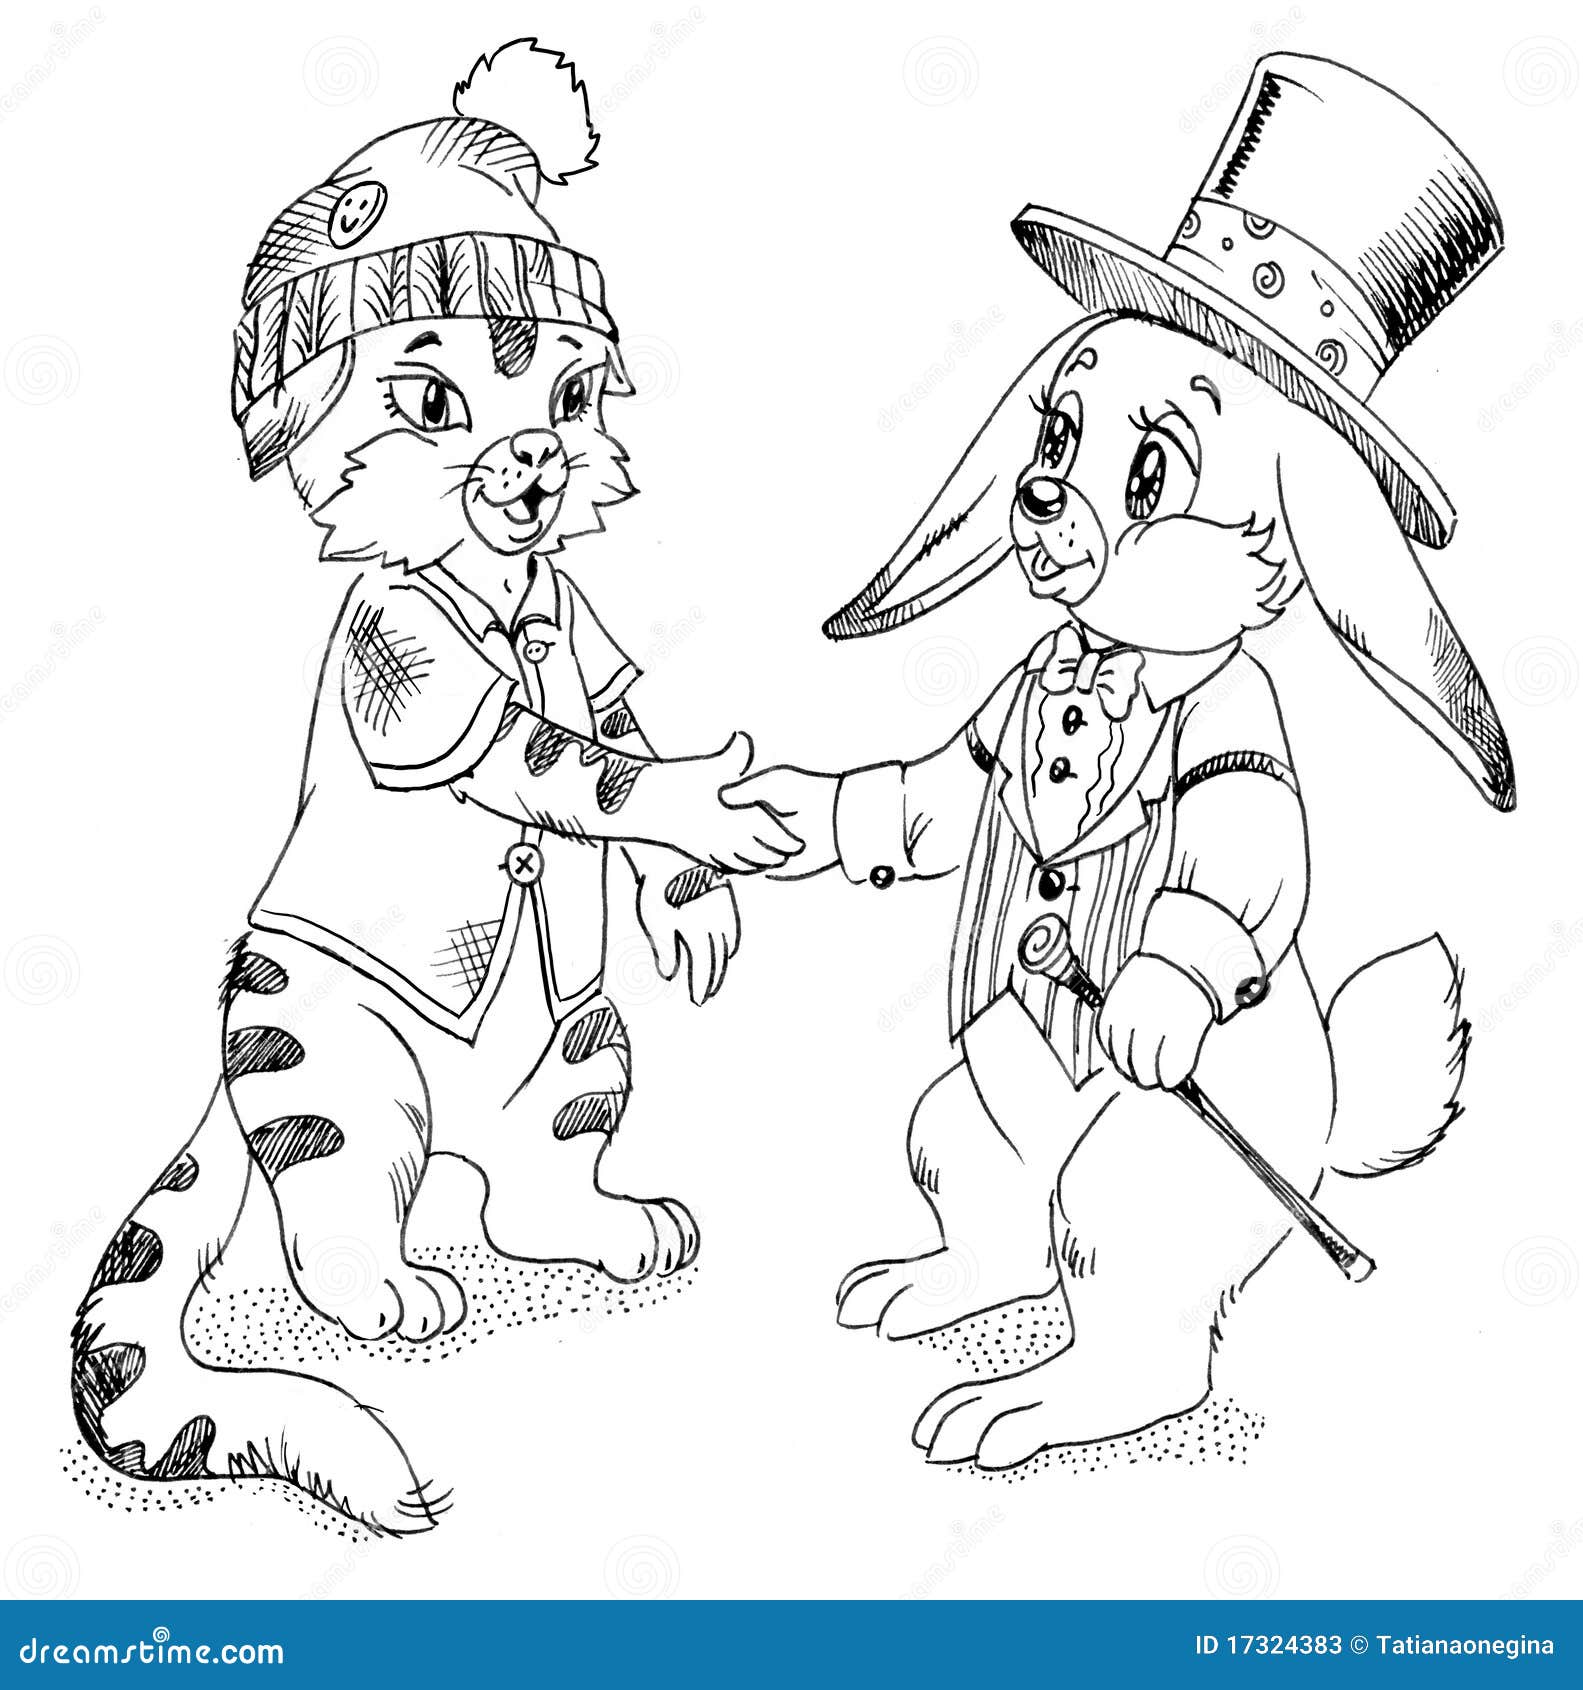 Cat and Bunny stock illustration. Illustration of meeting 17324383